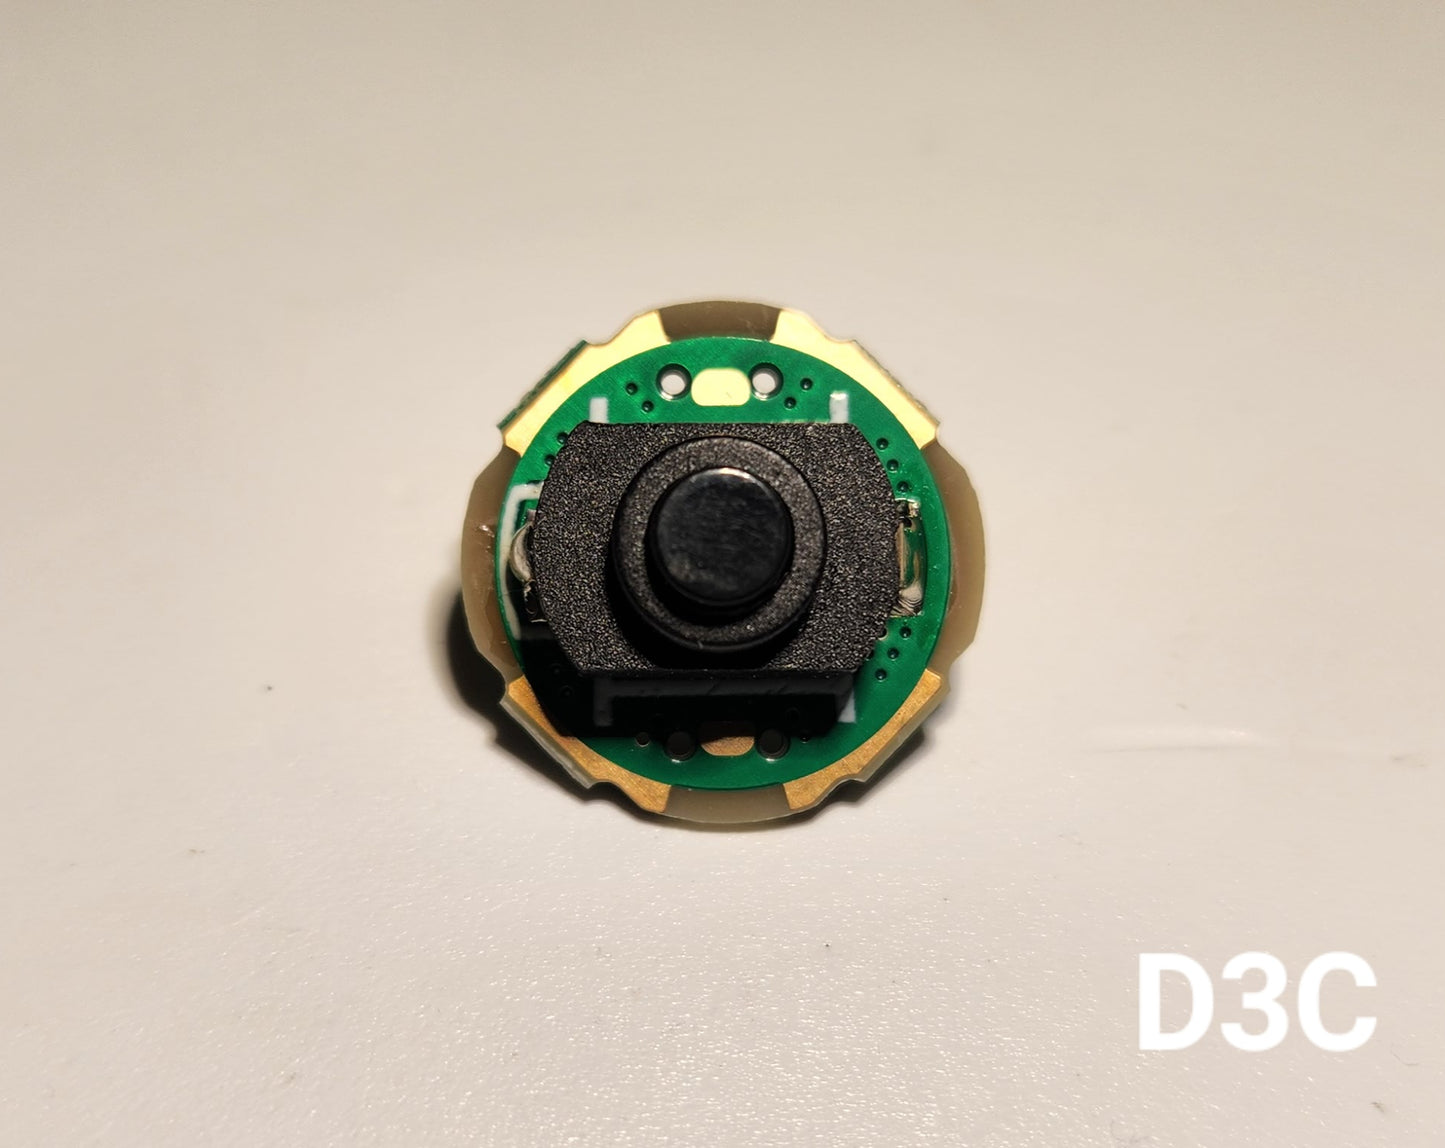 EAGTAC D3C D3A Replacement Rear Clicky Switch D3C